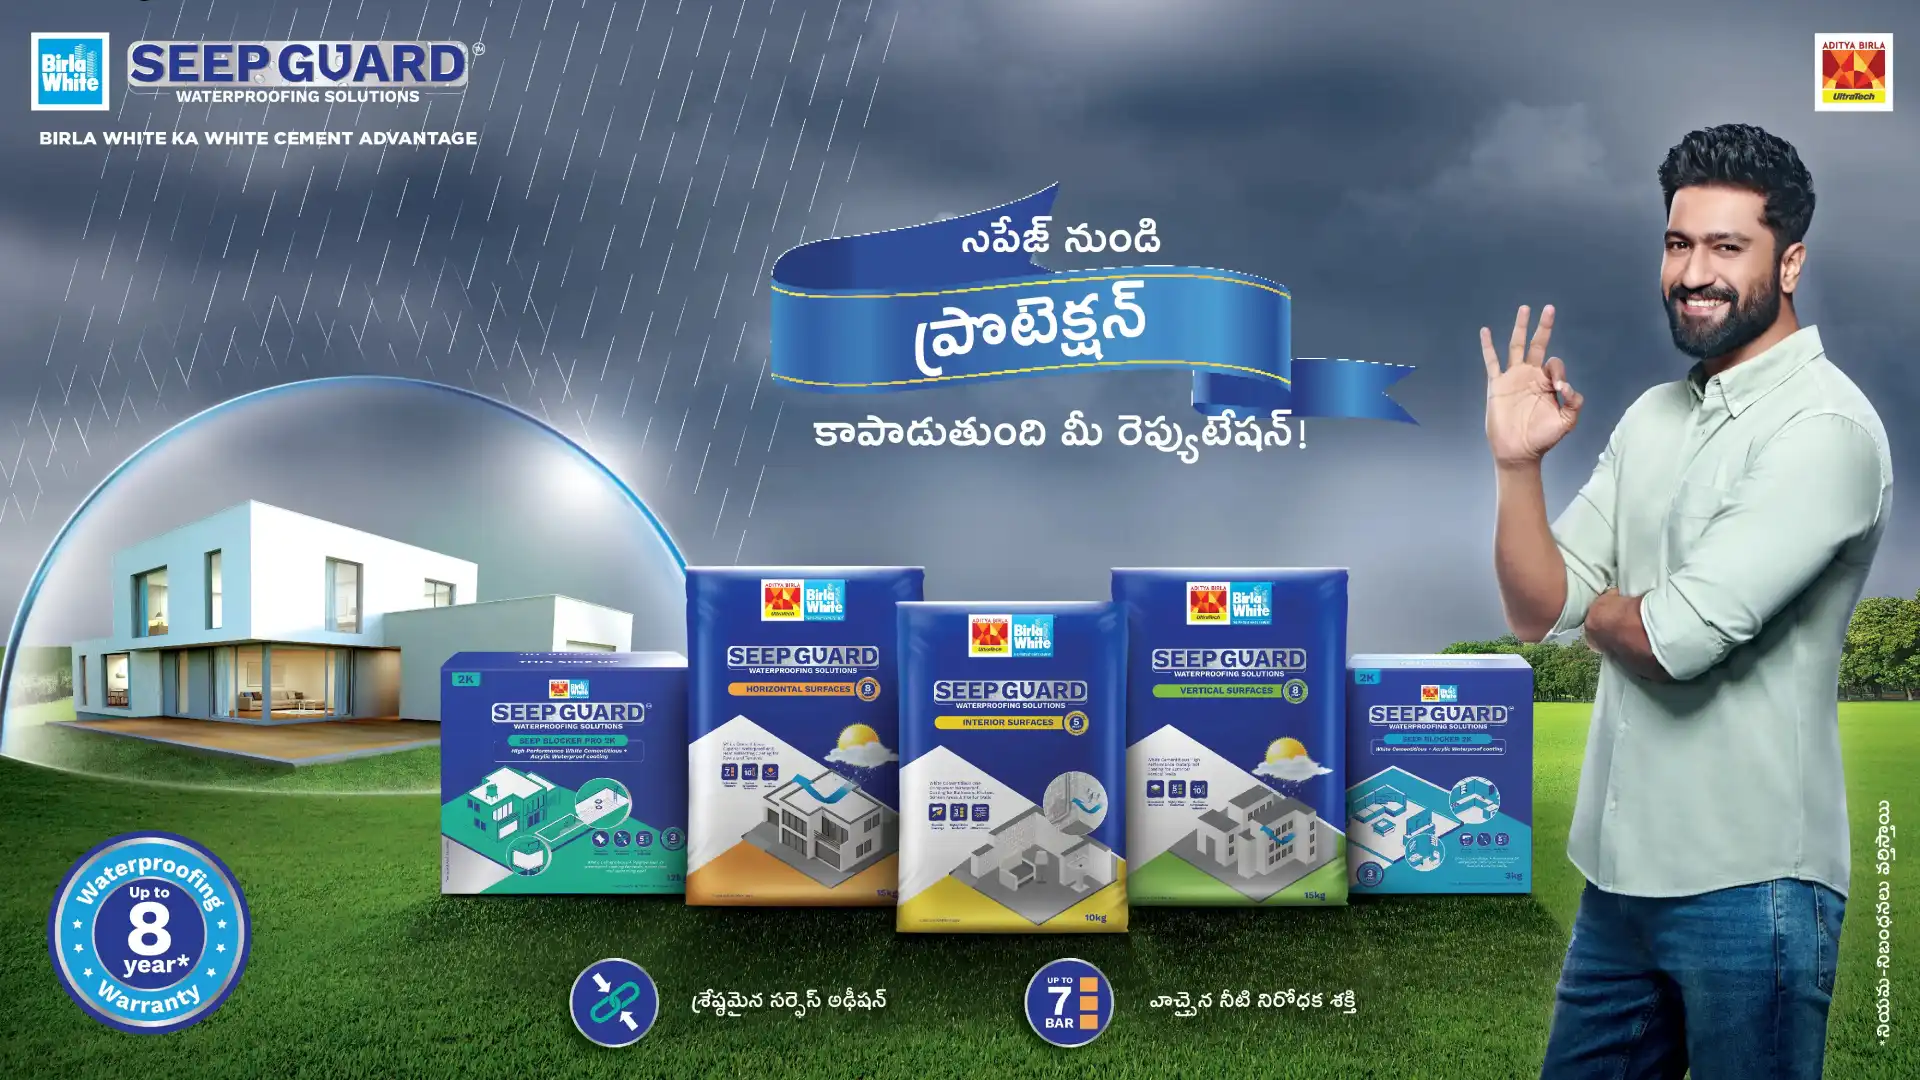 Waterproofing Solutions Products from Birla White